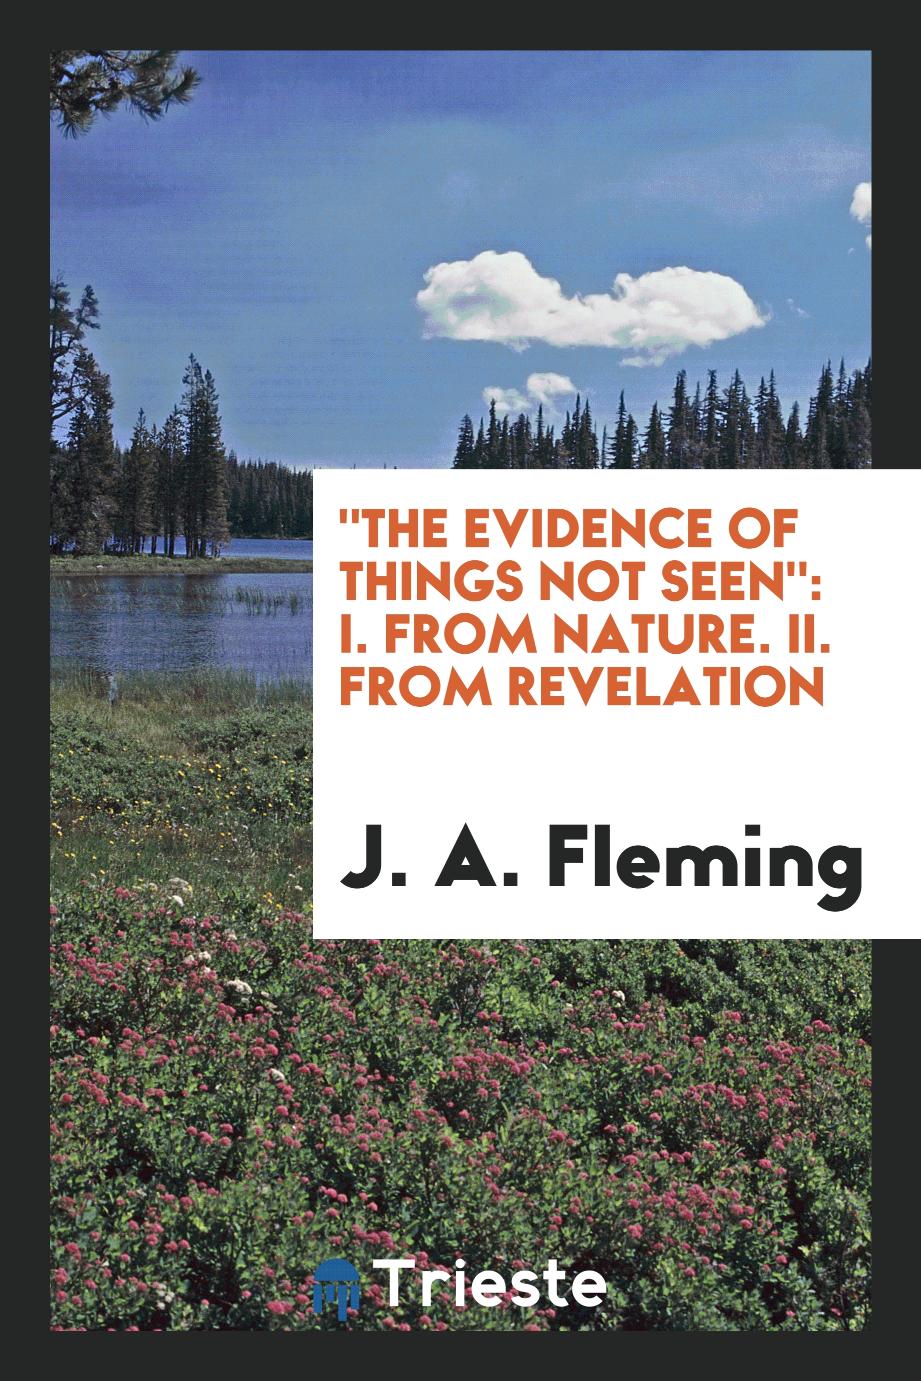 "The evidence of things not seen": I. From nature. II. From revelation